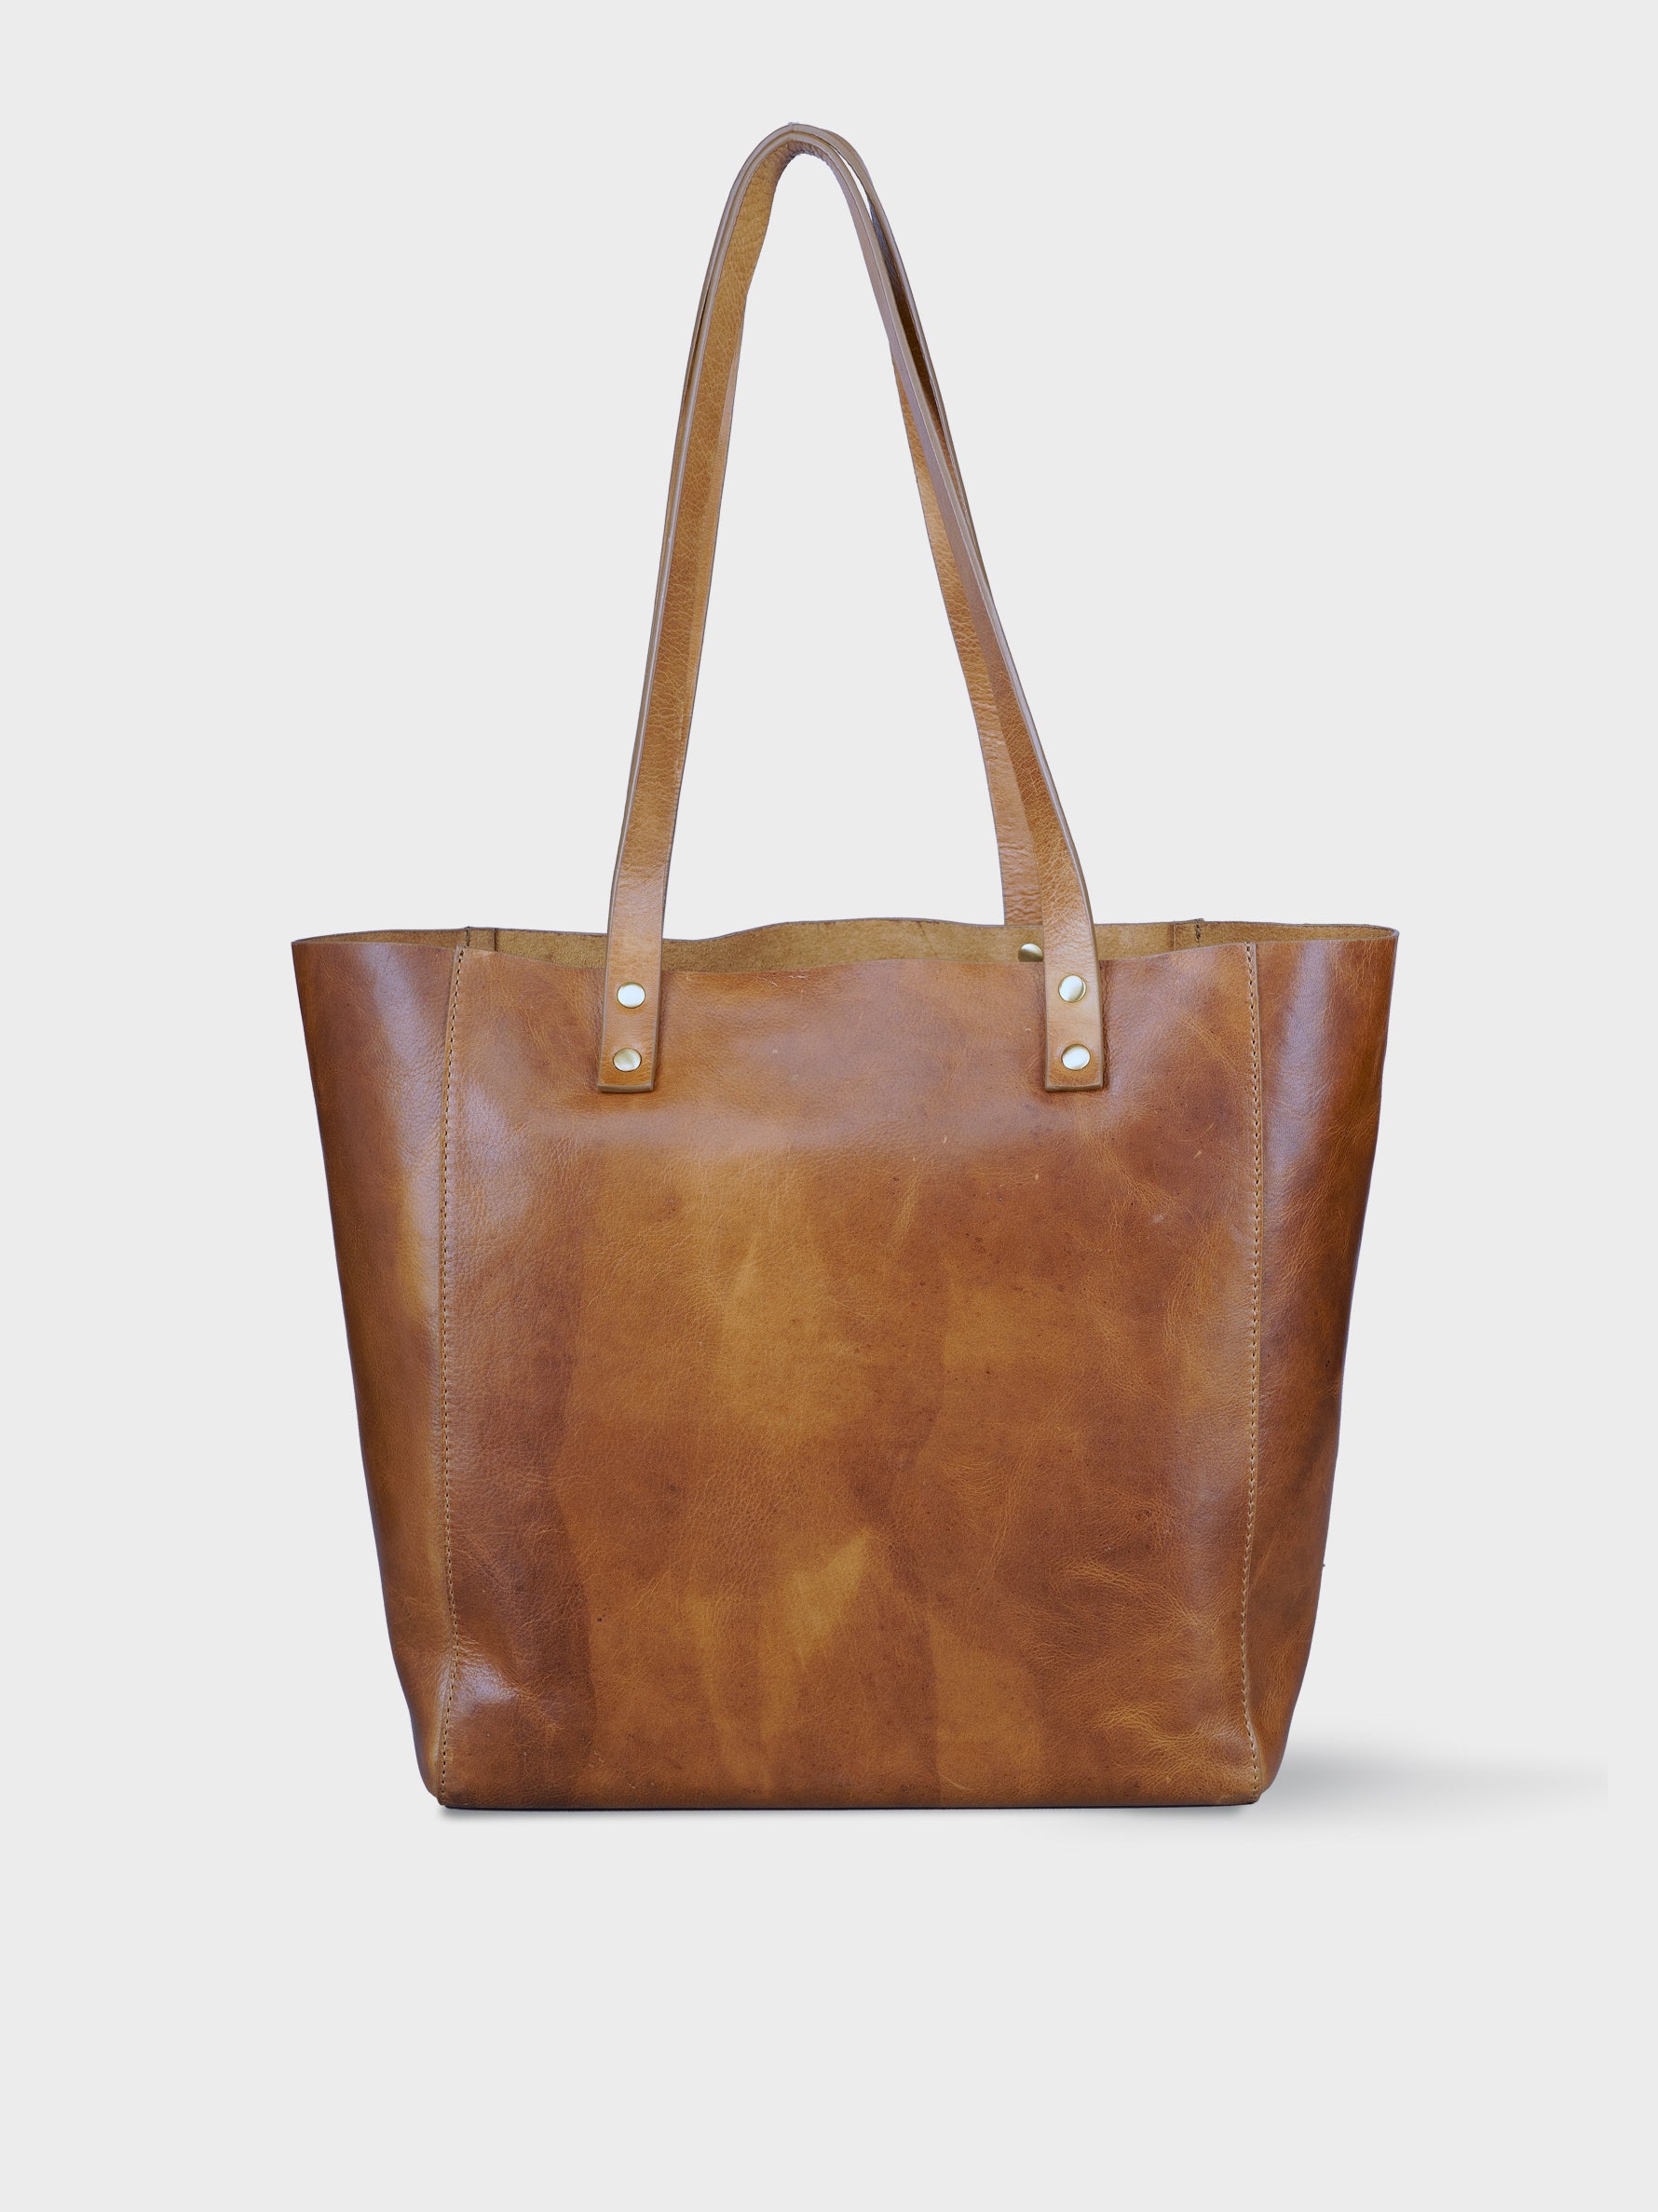 Handcrafted Genuine Vegetable Tanned Leather Old Fashioned Tote Regular Tuscany Tan for Women Tan & Loom